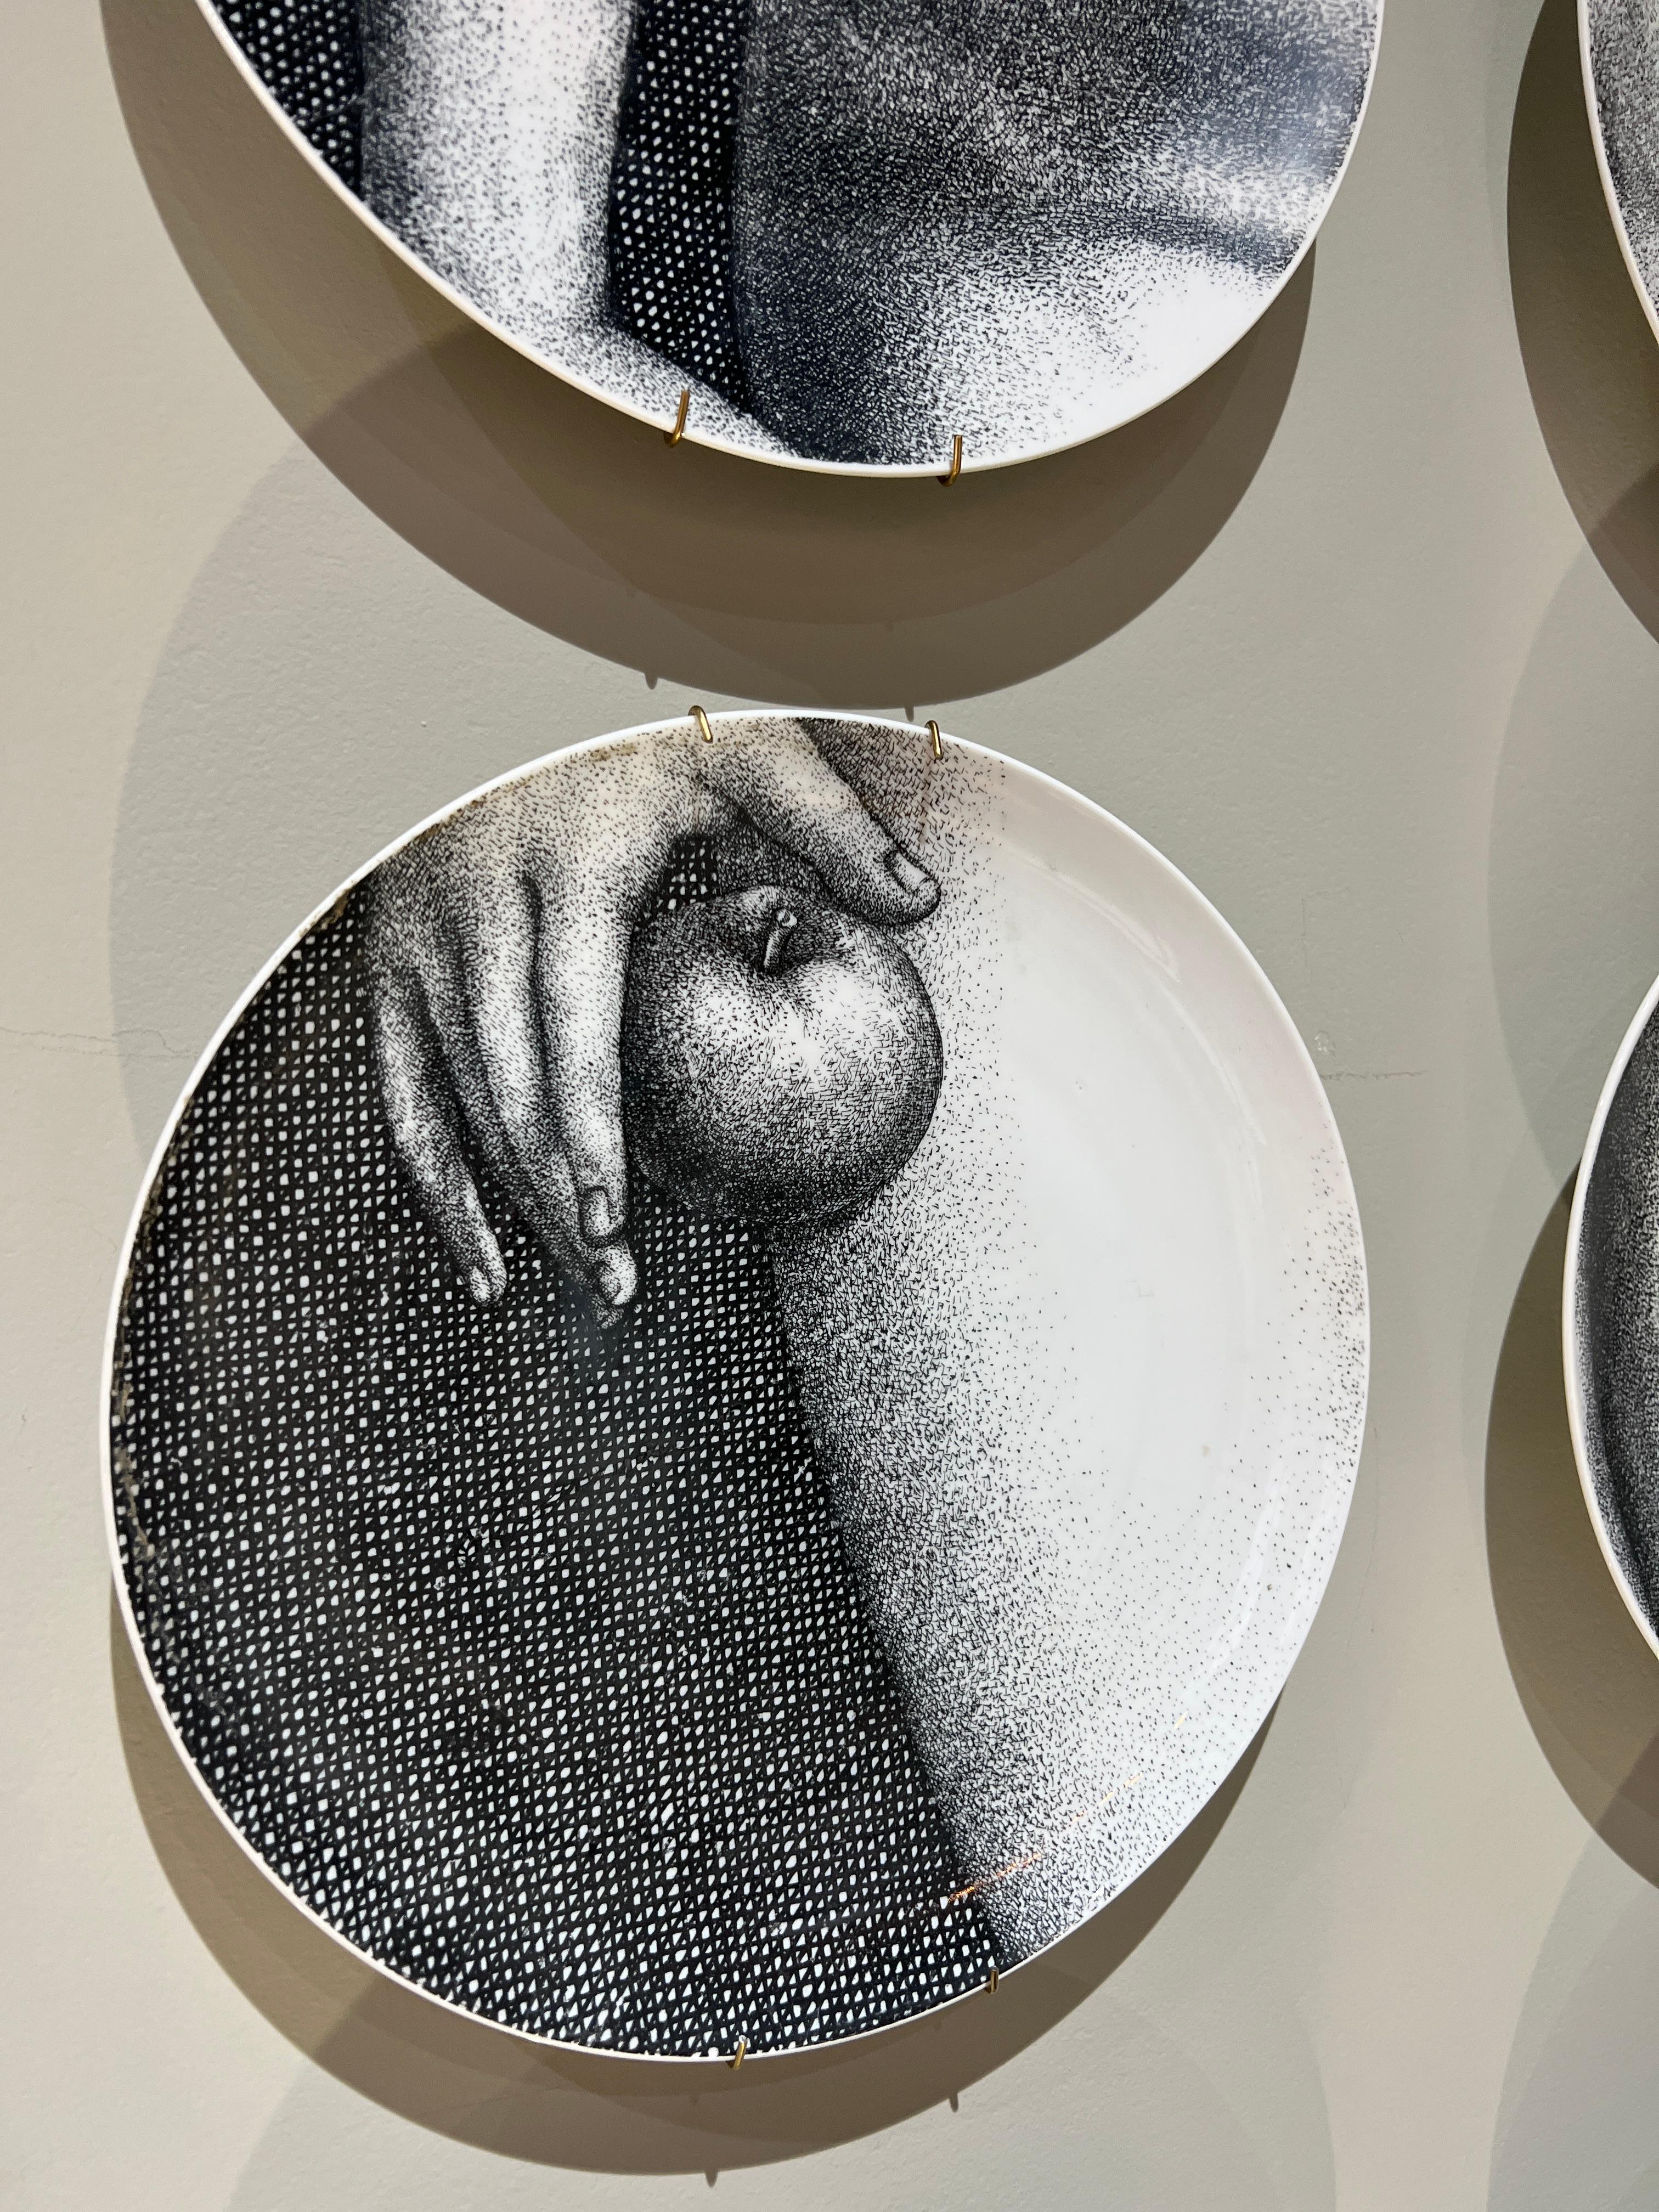 fornasetti adam and eve plates